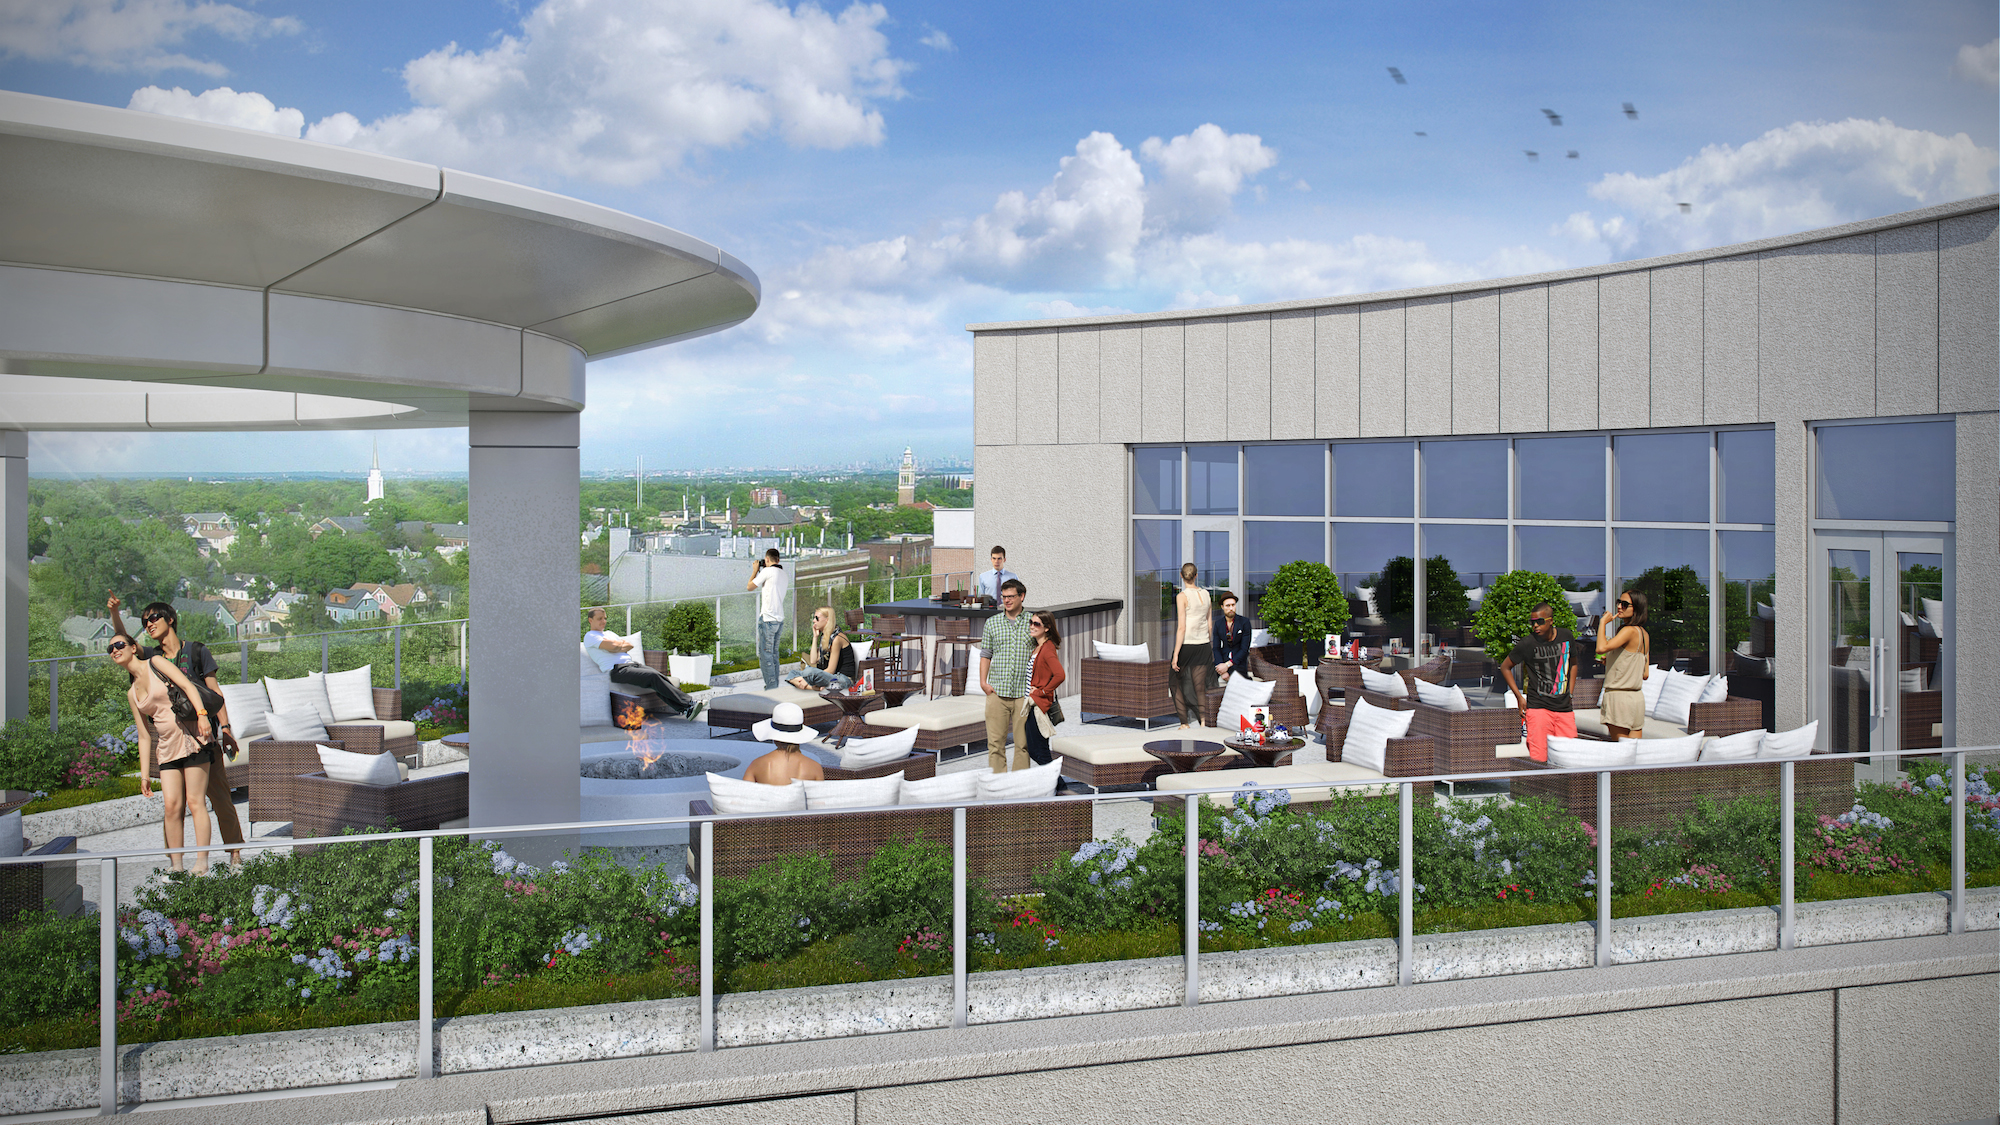 The MC's express elevator will take visitors up to a rooftop bar offering views of Manhattan to the east and the Eagle Rock Reservation to the west.